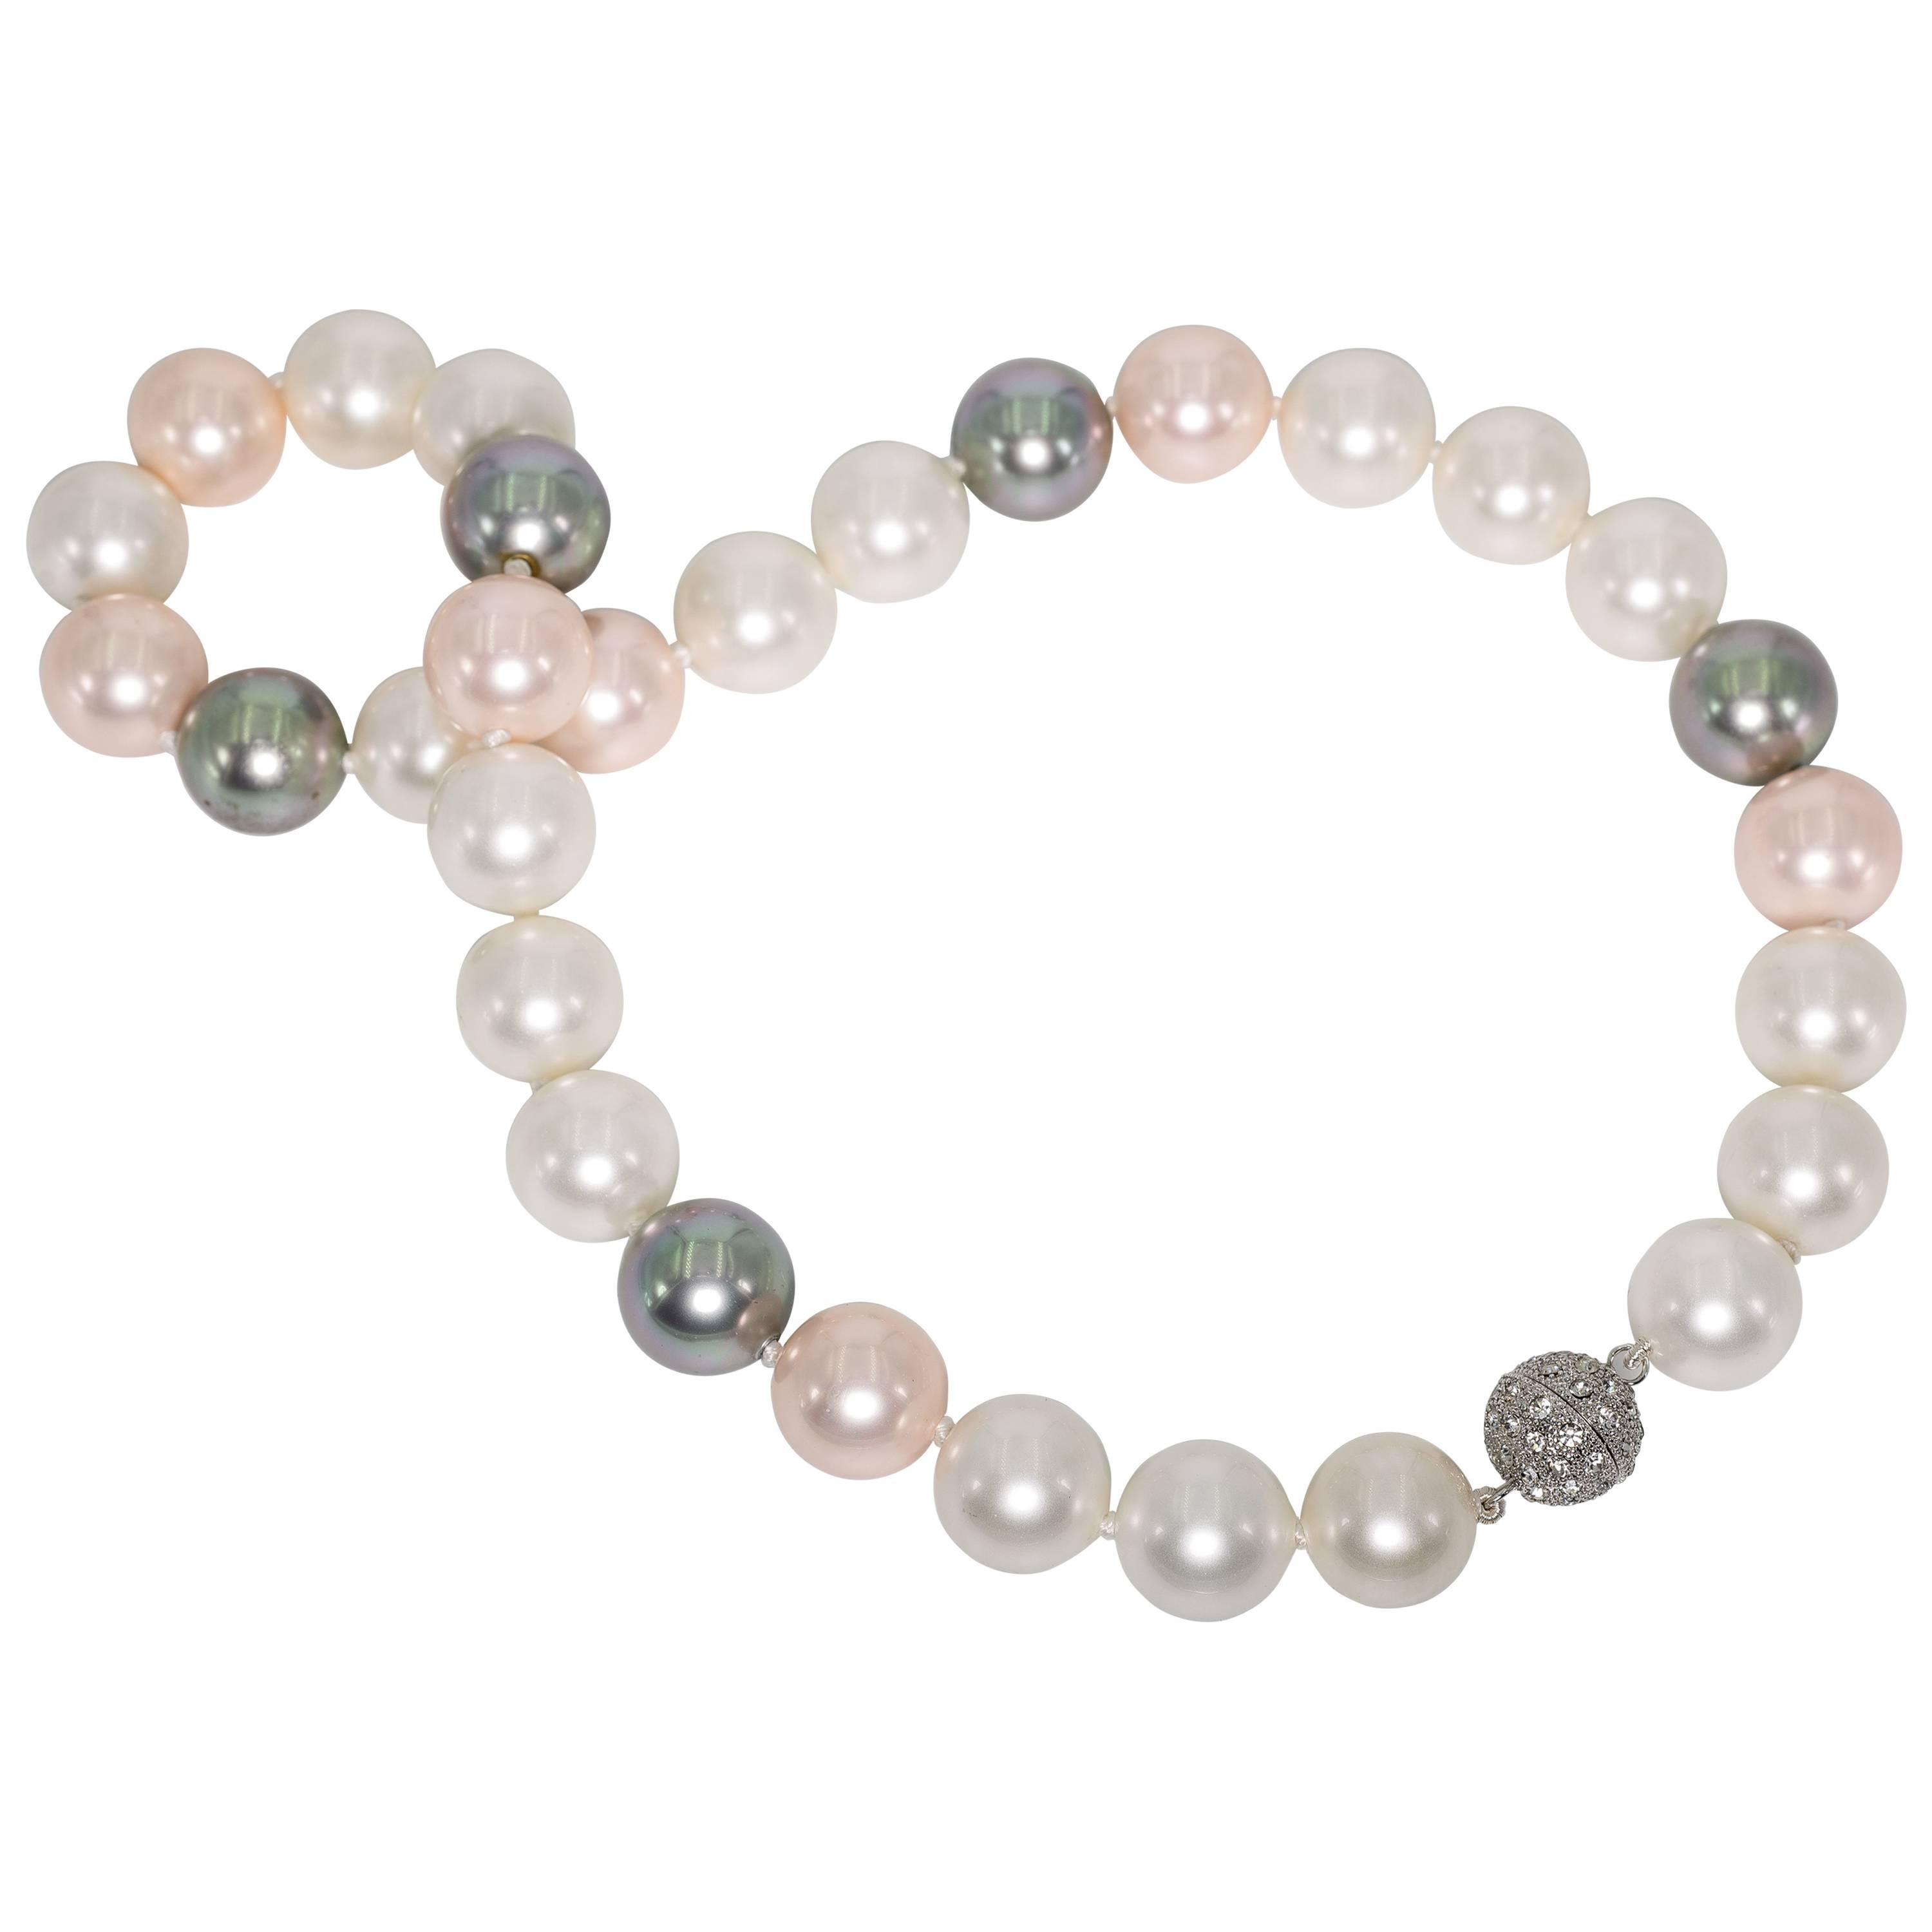 Faux 16mm South Sea White, Pink and Grey Pearl 21’’ Necklace